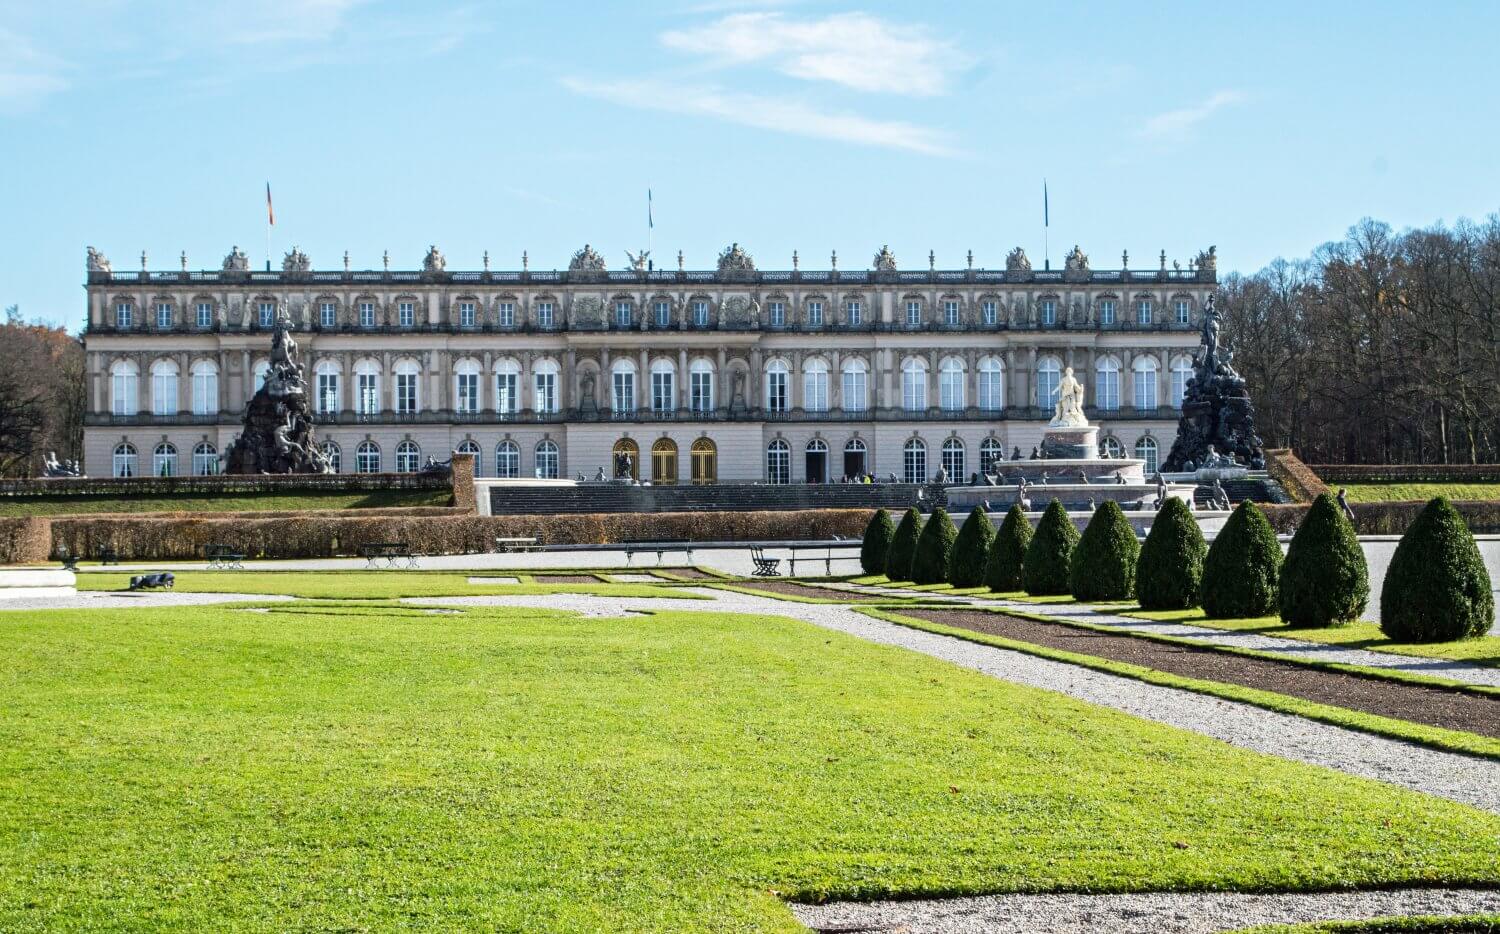 The front gardens of Herrenchiemsee New Palace in Bavaria, Germany